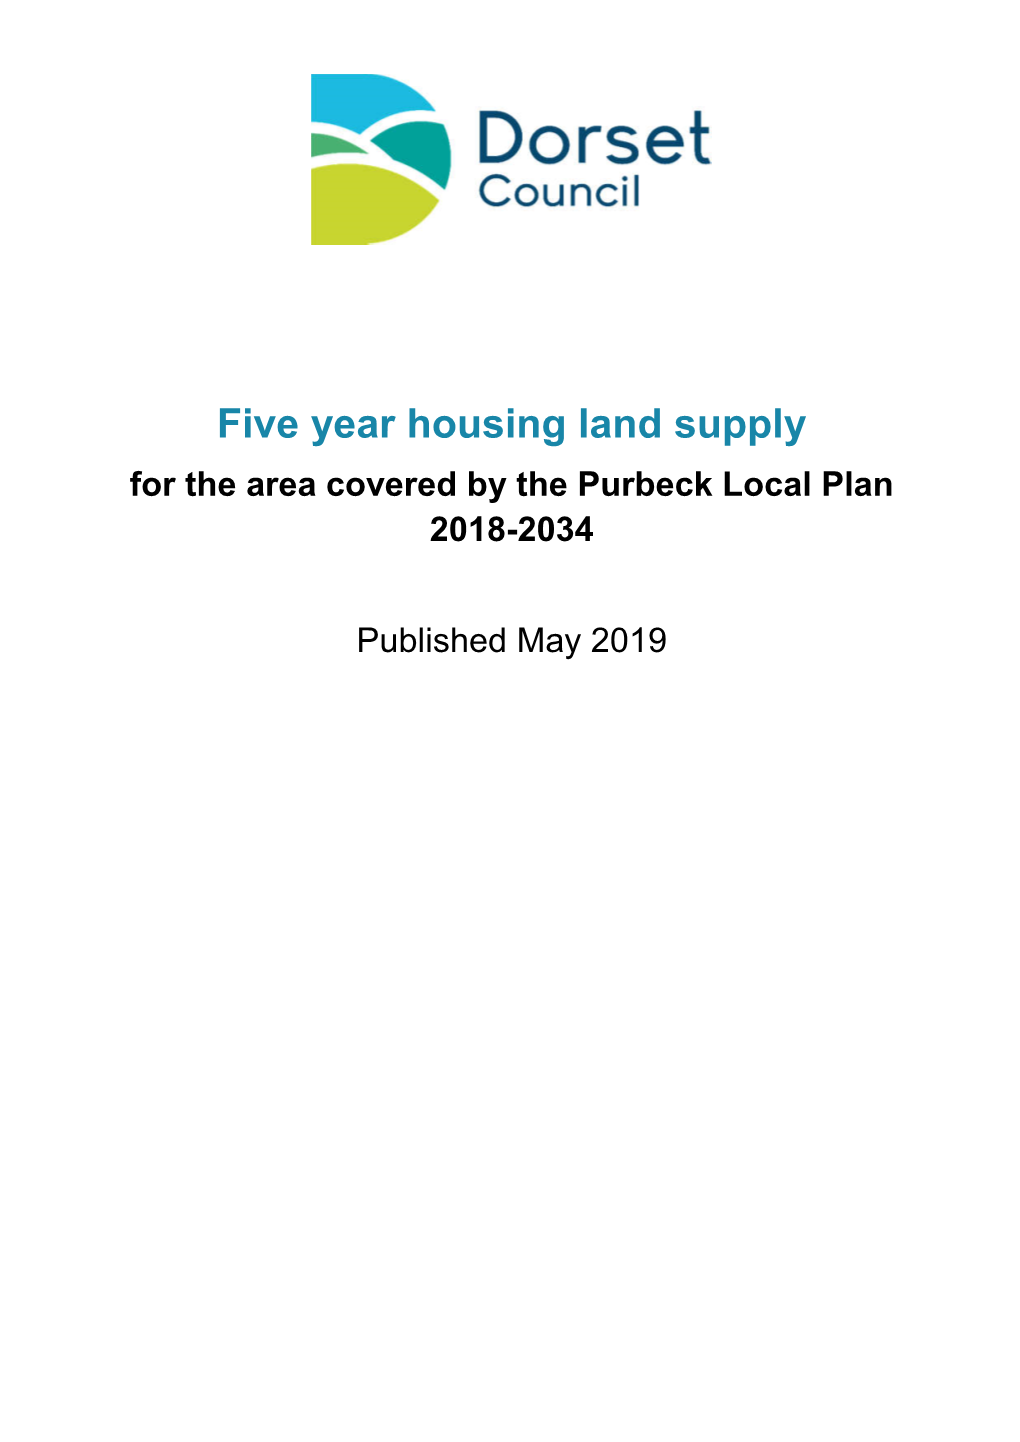 Five Year Housing Land Supply for the Area Covered by the Purbeck Local Plan 2018-2034